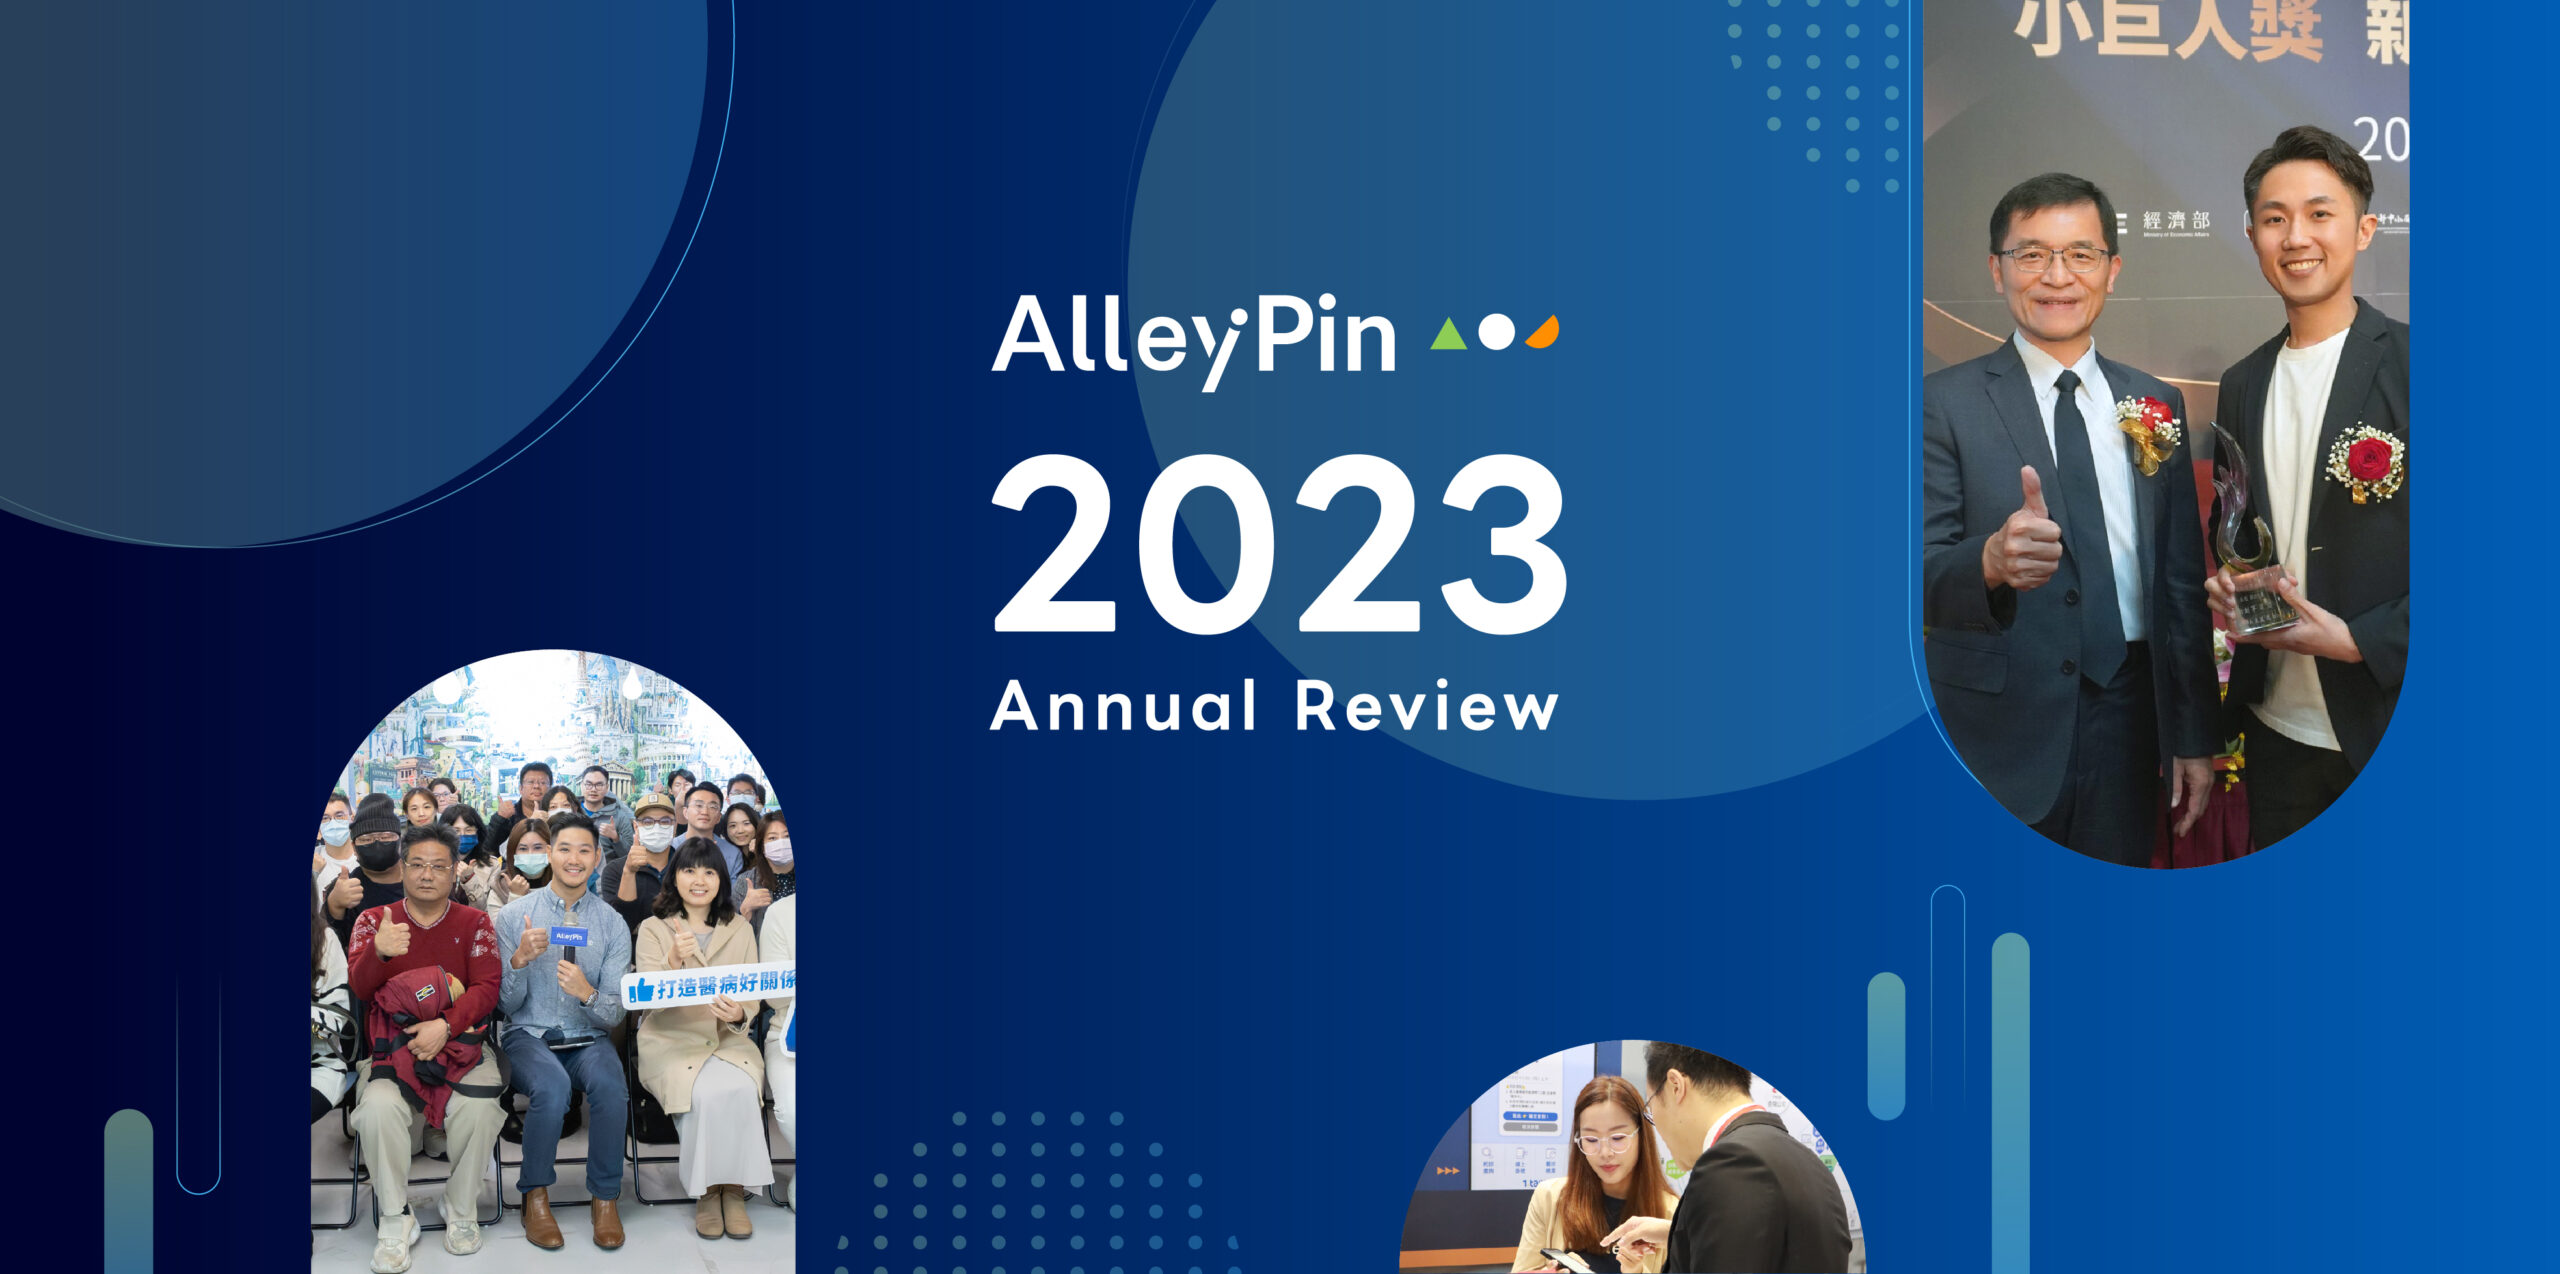 alleypin-2023-annual-review